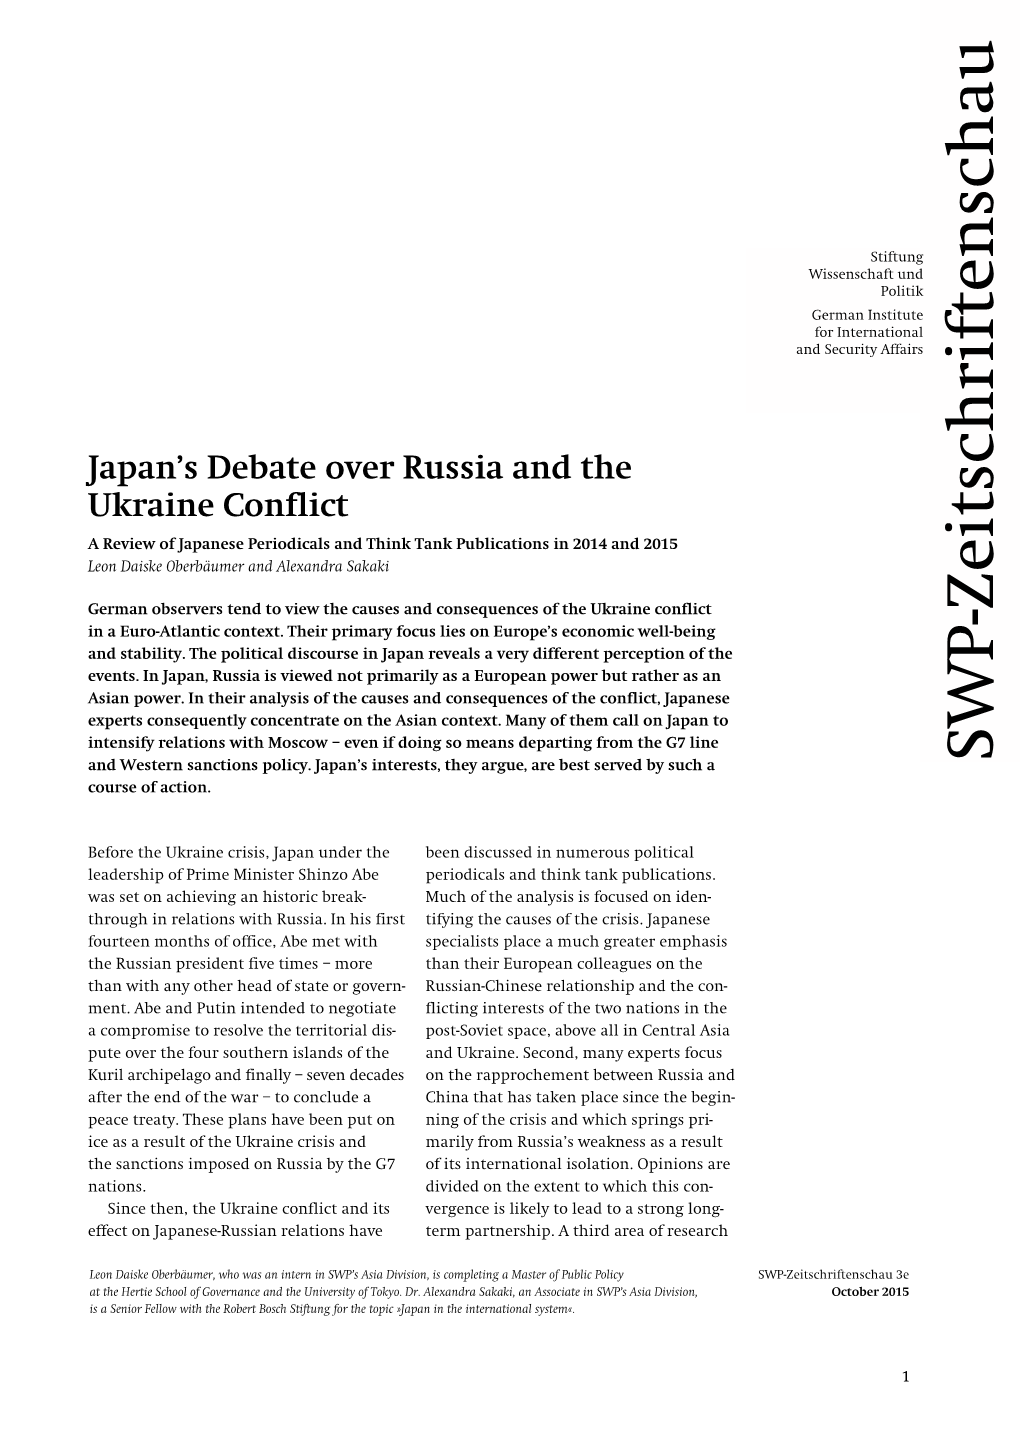 Japan's Debate Over Russia and the Ukraine Conflict. a Review Of